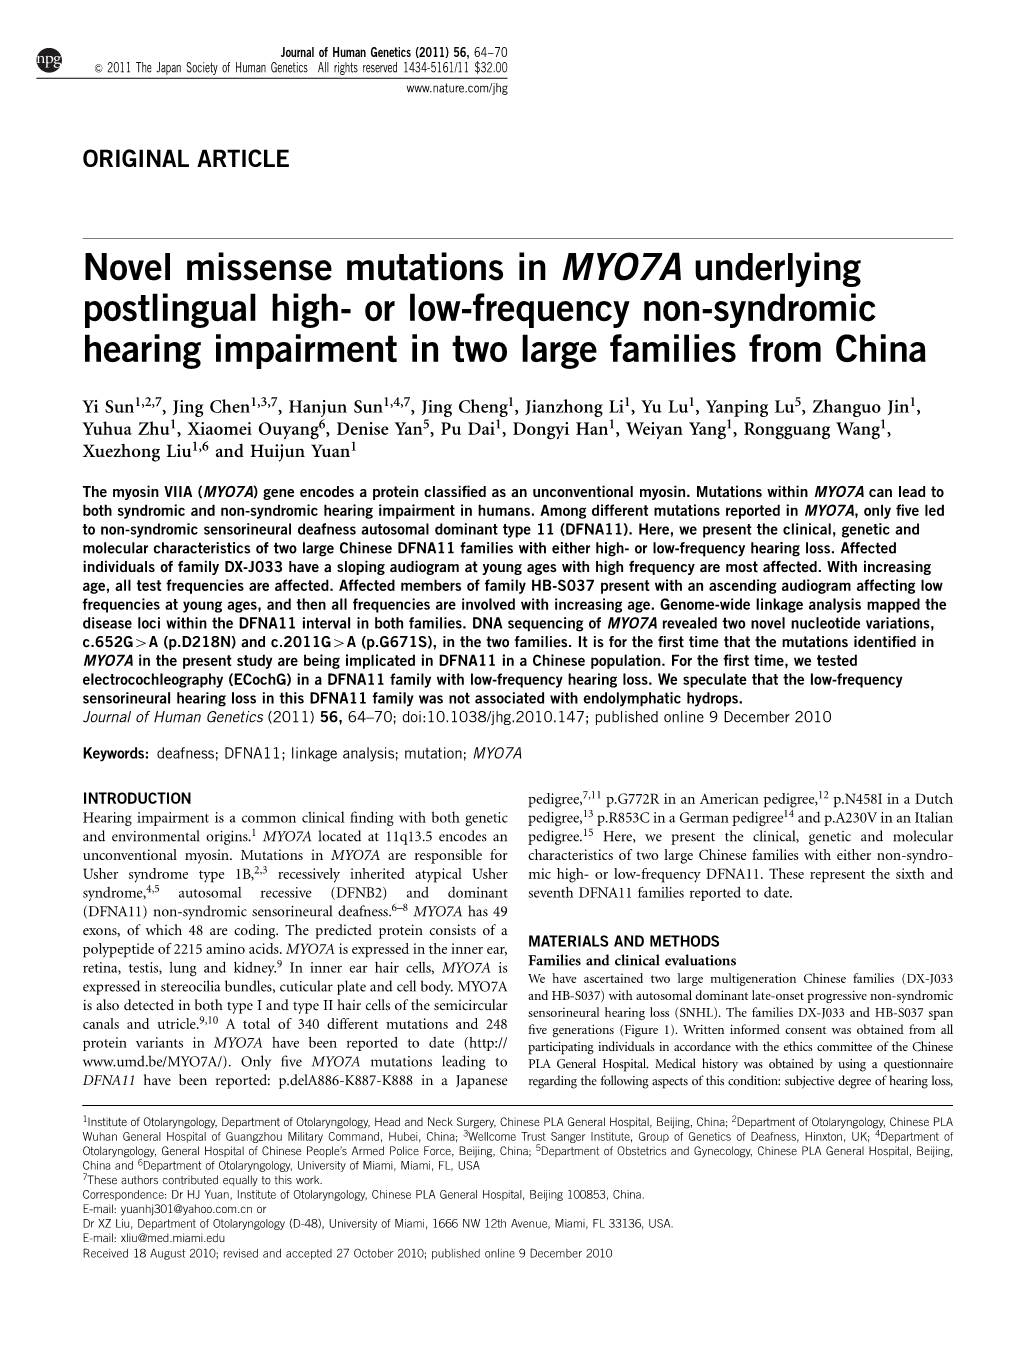 Novel Missense Mutations in MYO7A Underlying Postlingual High- Or Low-Frequency Non-Syndromic Hearing Impairment in Two Large Families from China